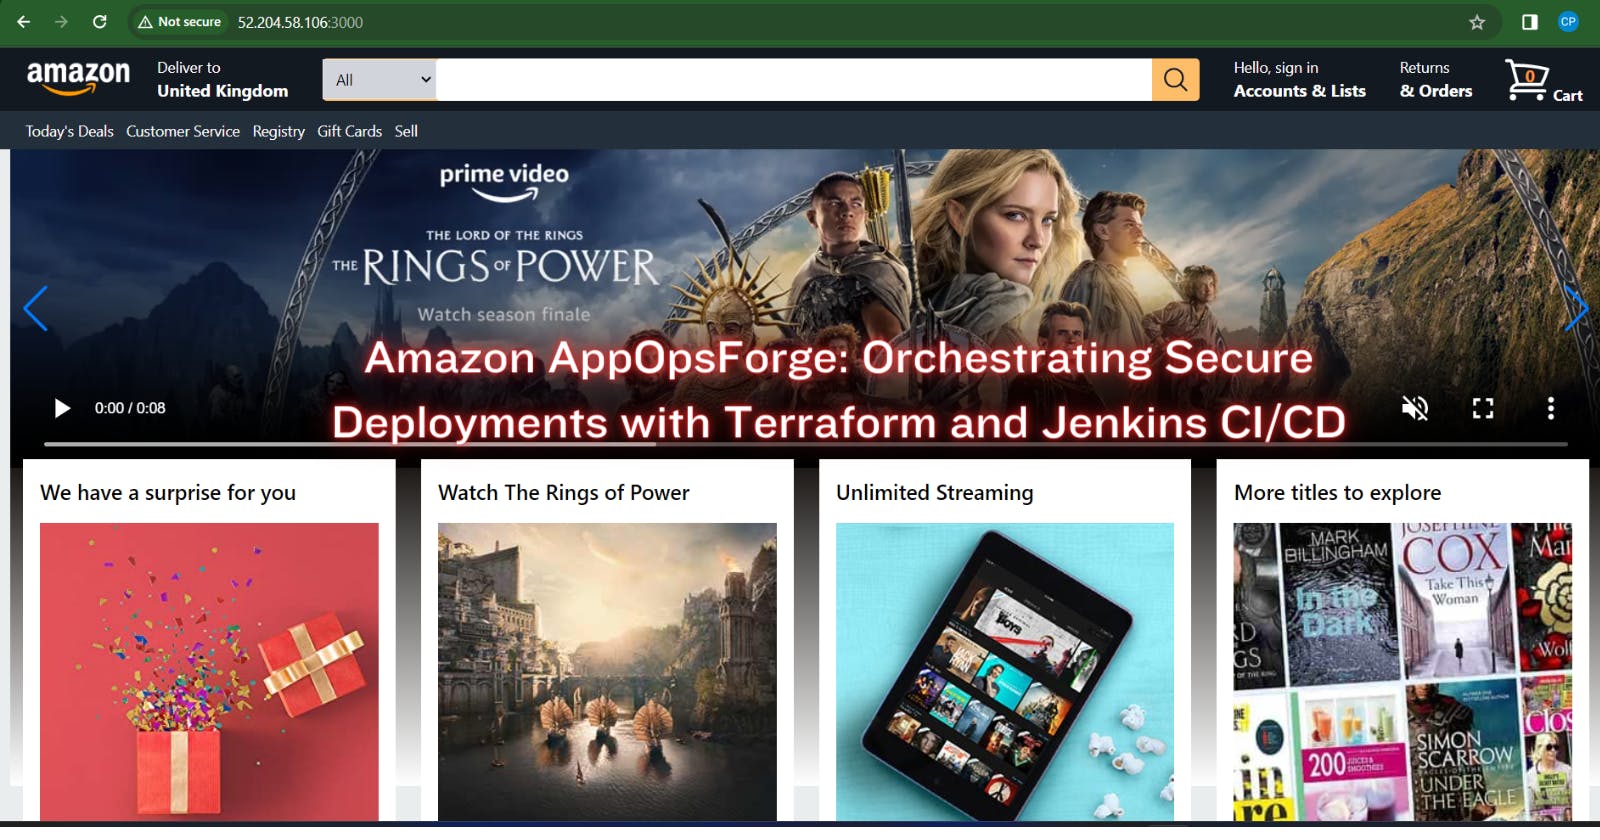 Amazon AppOpsForge: Orchestrating Secure Deployments with Terraform and Jenkins CI/CD